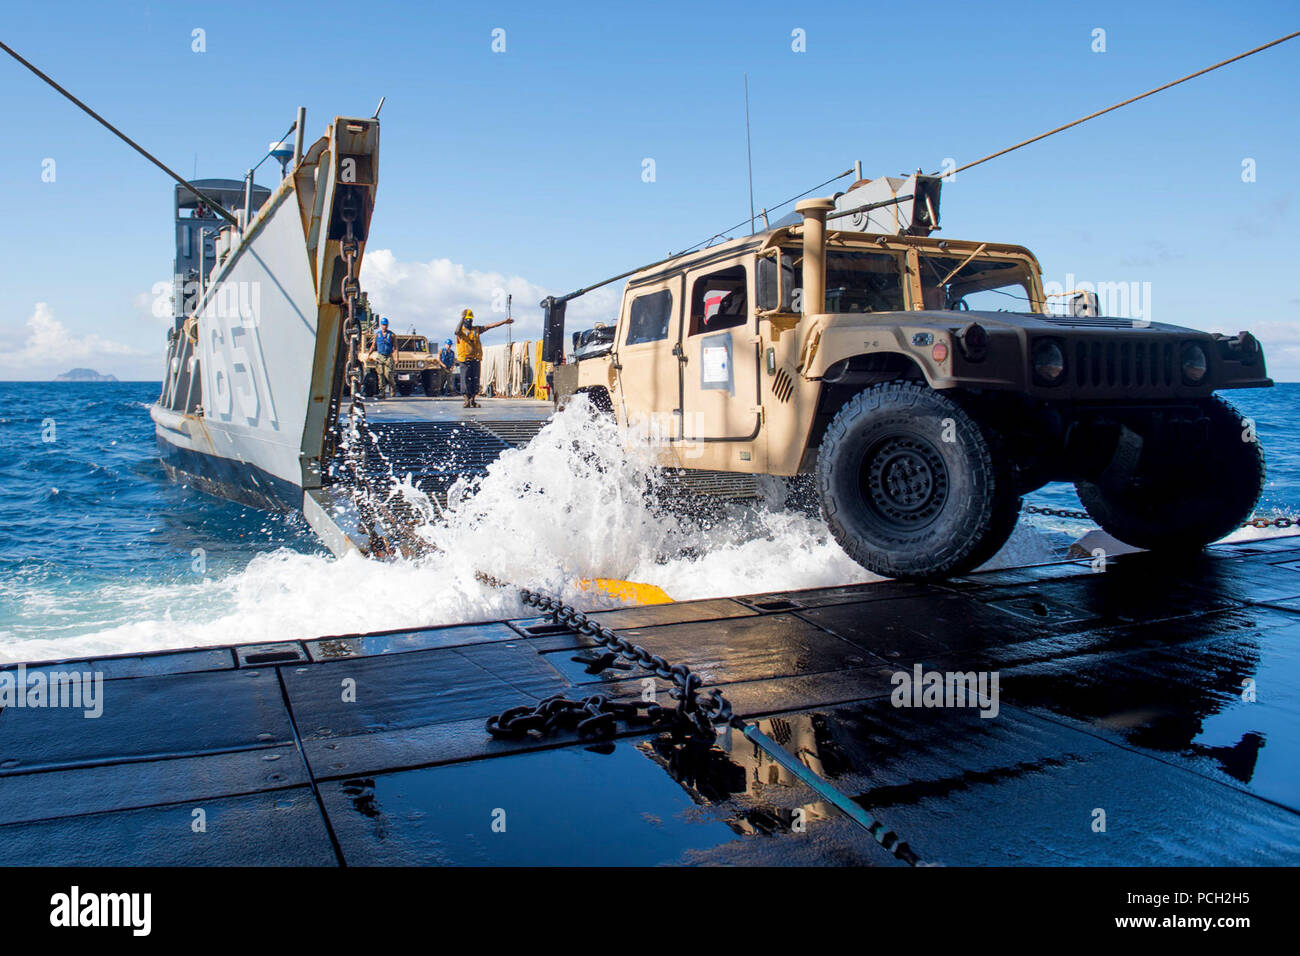 CORAL SEA (July 19, 2017) Boatswain’s Mate 3rd Class Sirus Woodard directs a Humvee onto Landing Craft Utility (LCU) 1651 from the amphibious transport dock ship USS Ashland (LSD 48) as part of an amphibious assault during Talisman Saber 17. Talisman Saber is a biennial U.S.-Australia bilateral exercise held off the coast of Australia meant to achieve interoperability and strengthen the U.S.-Australia alliance. Stock Photo